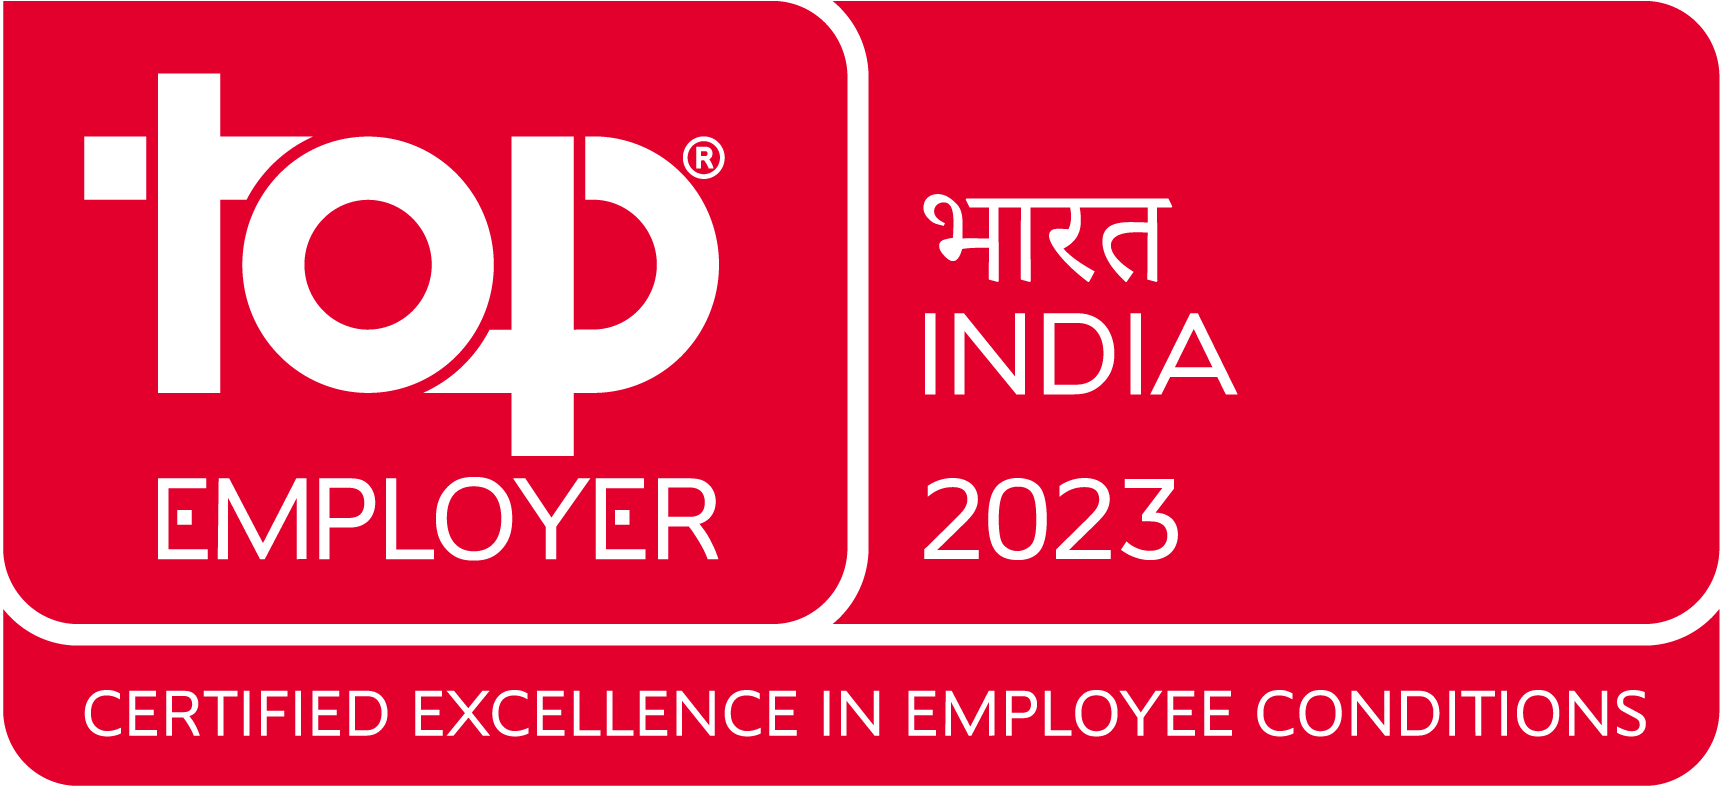 Top_Employer_India_2023.png